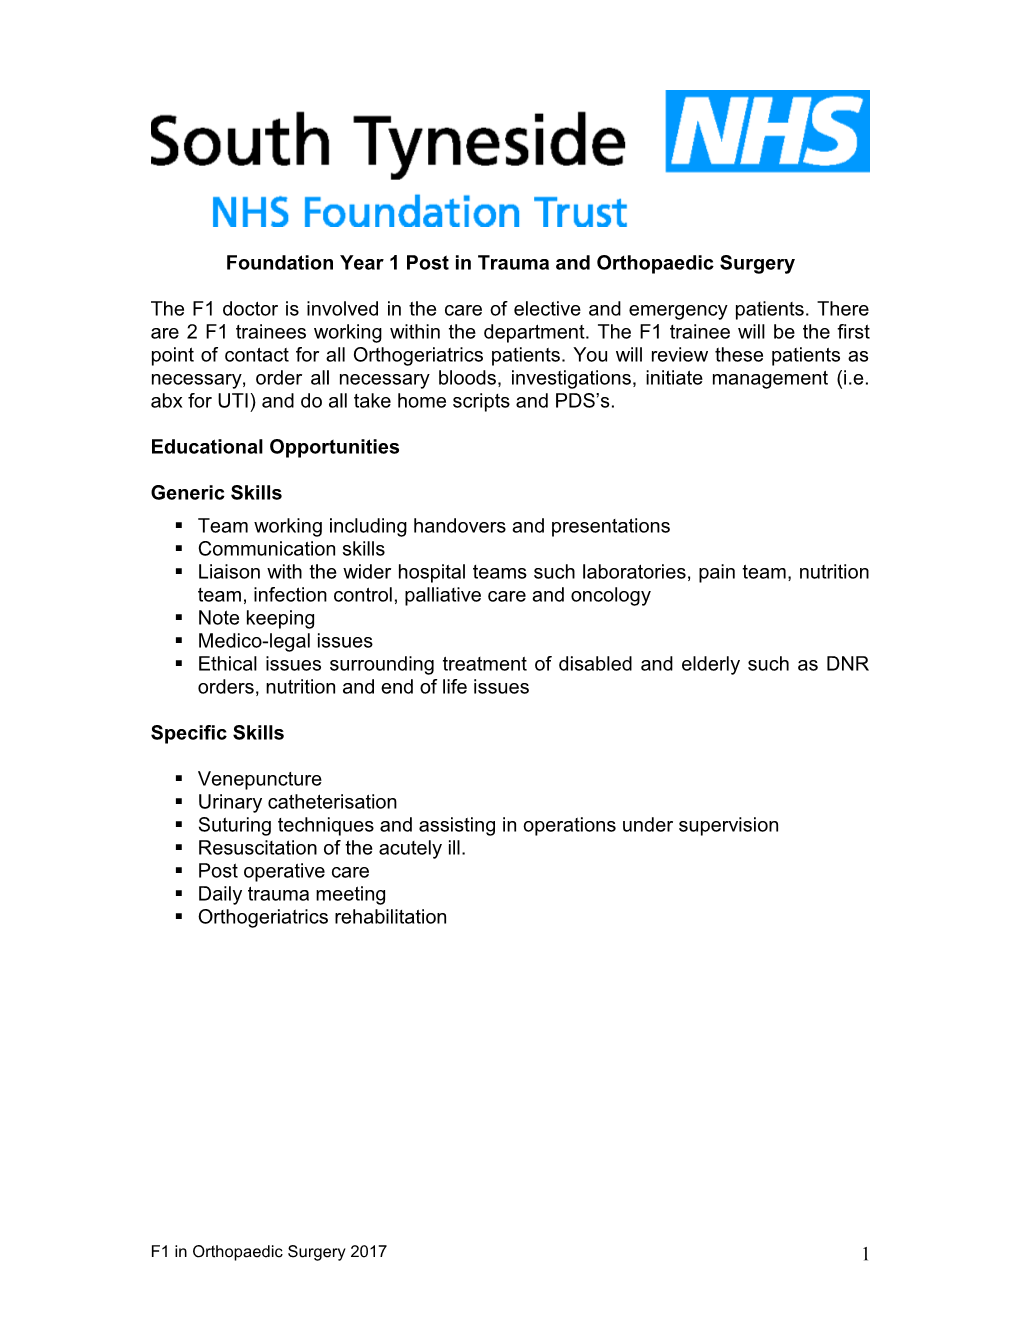 Foundation Year 1 Placement in General Surgery